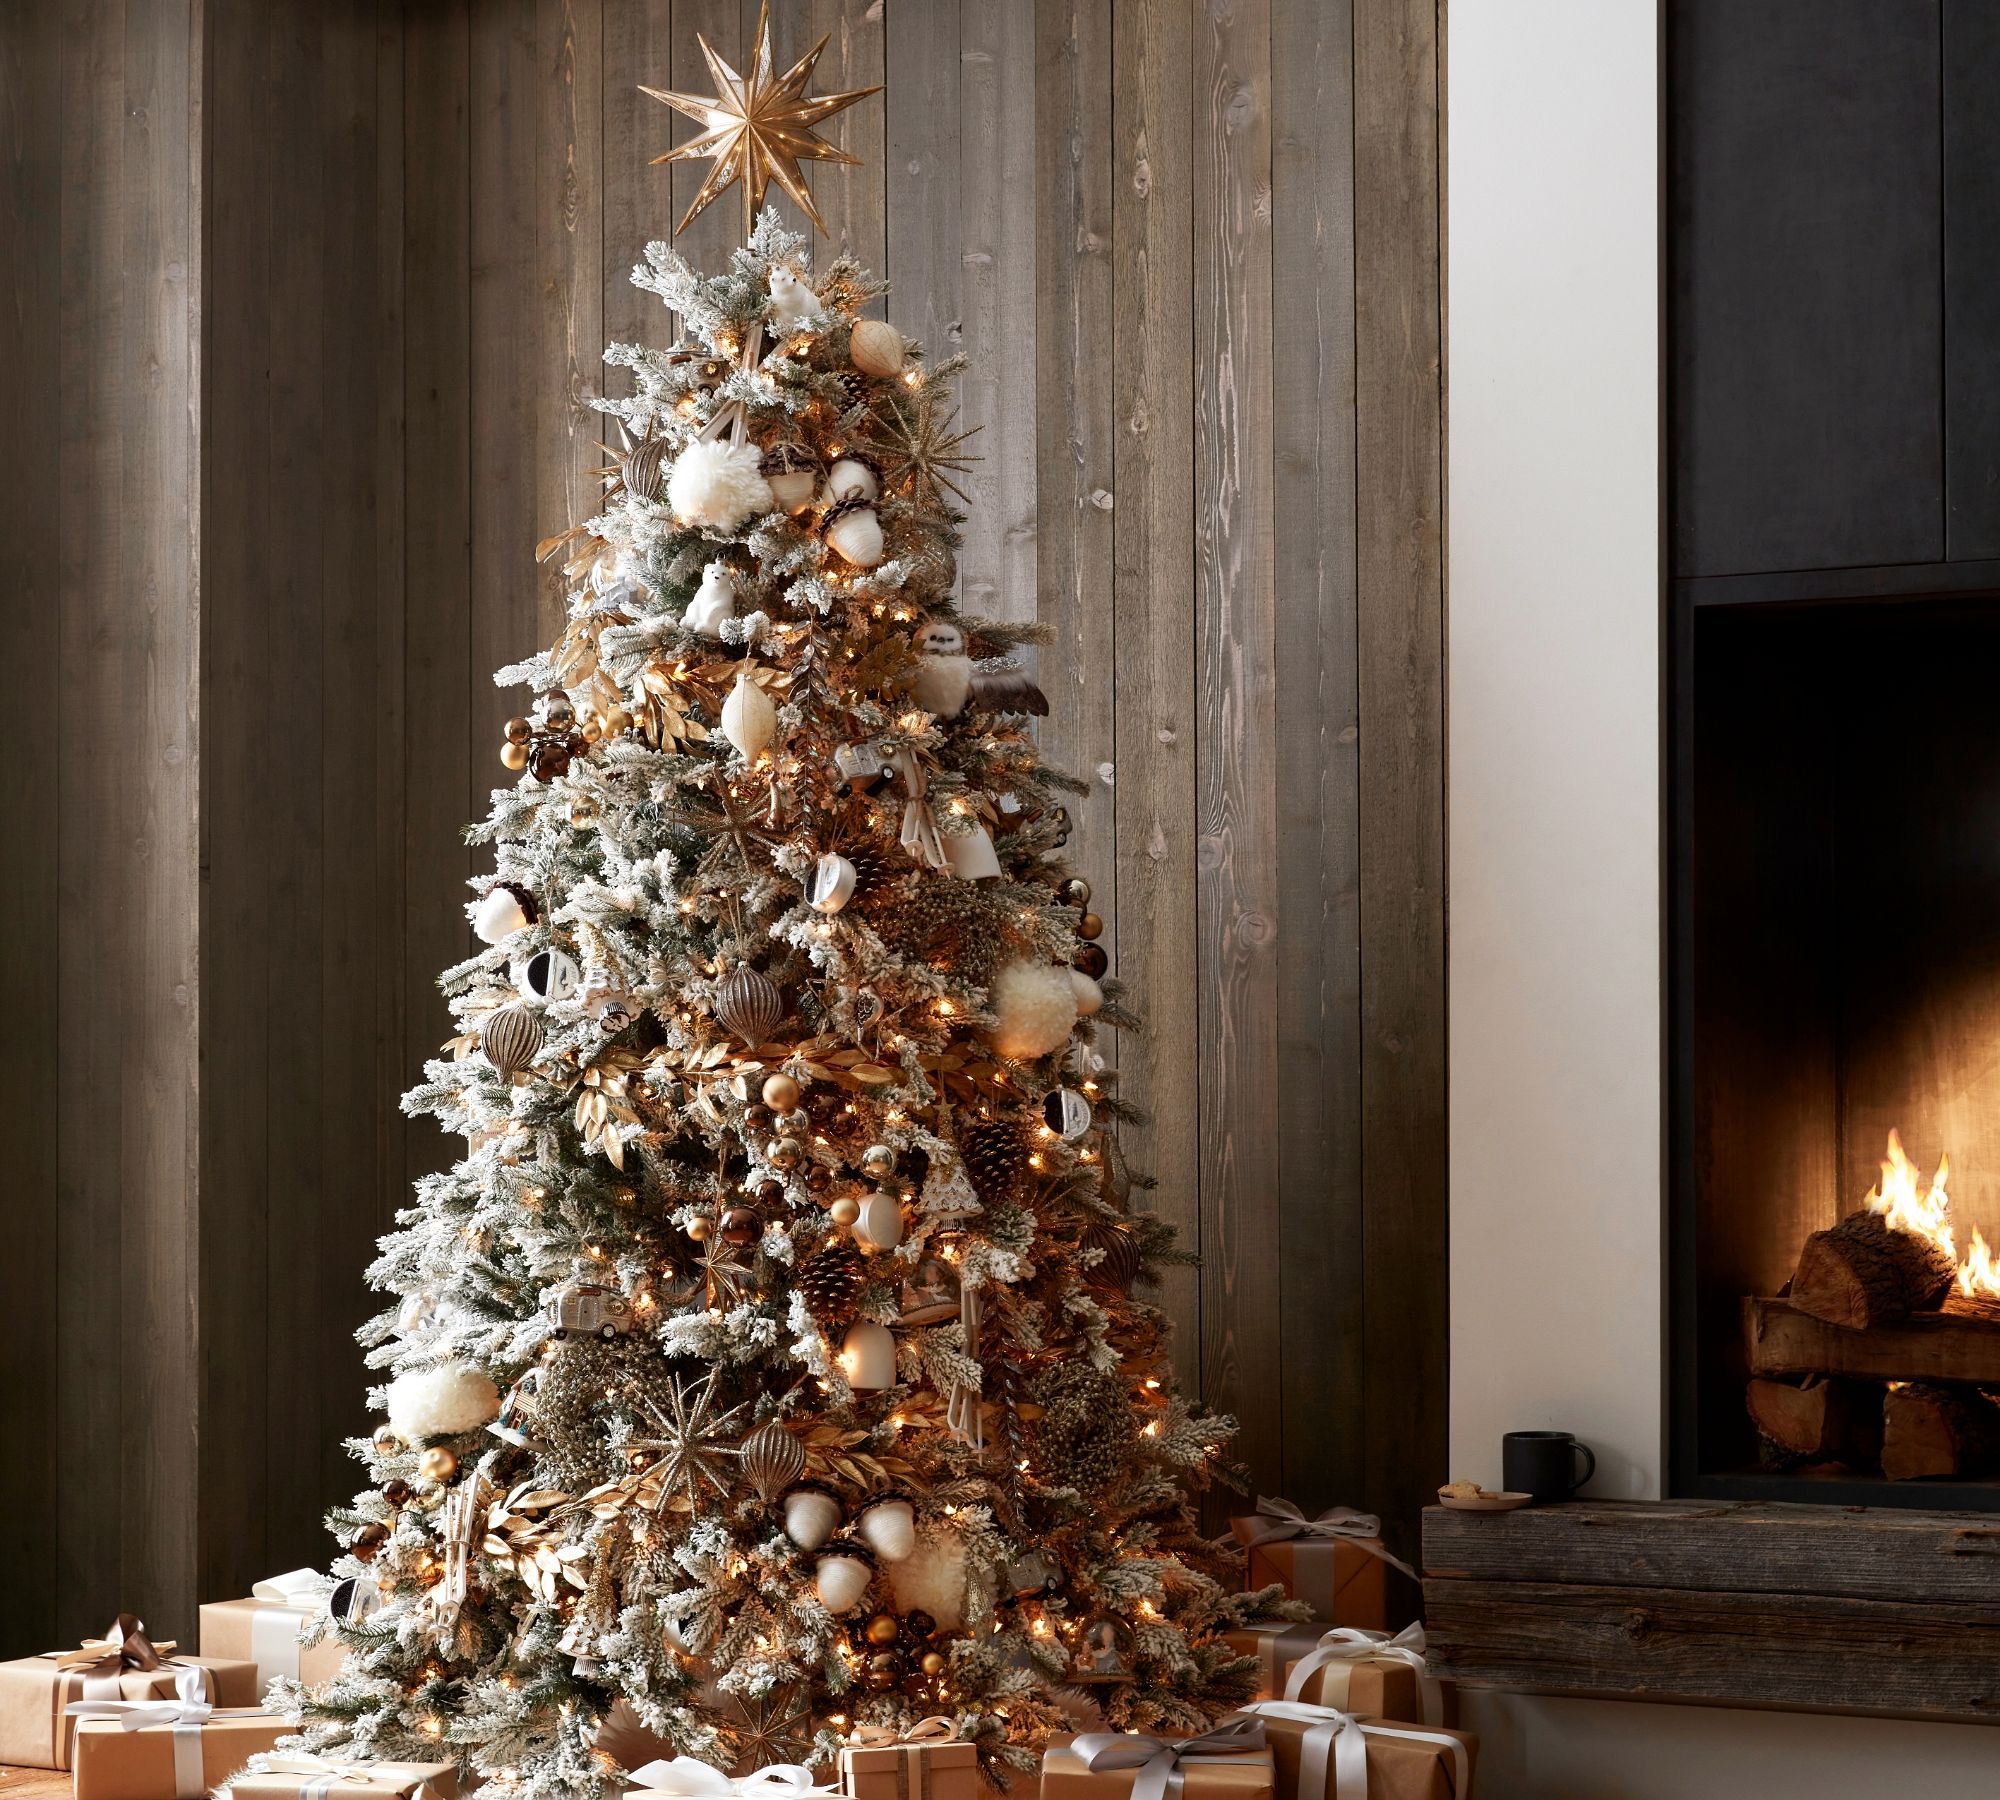 all foraged and natural Christmas decor you'll love | Most Lovely Things